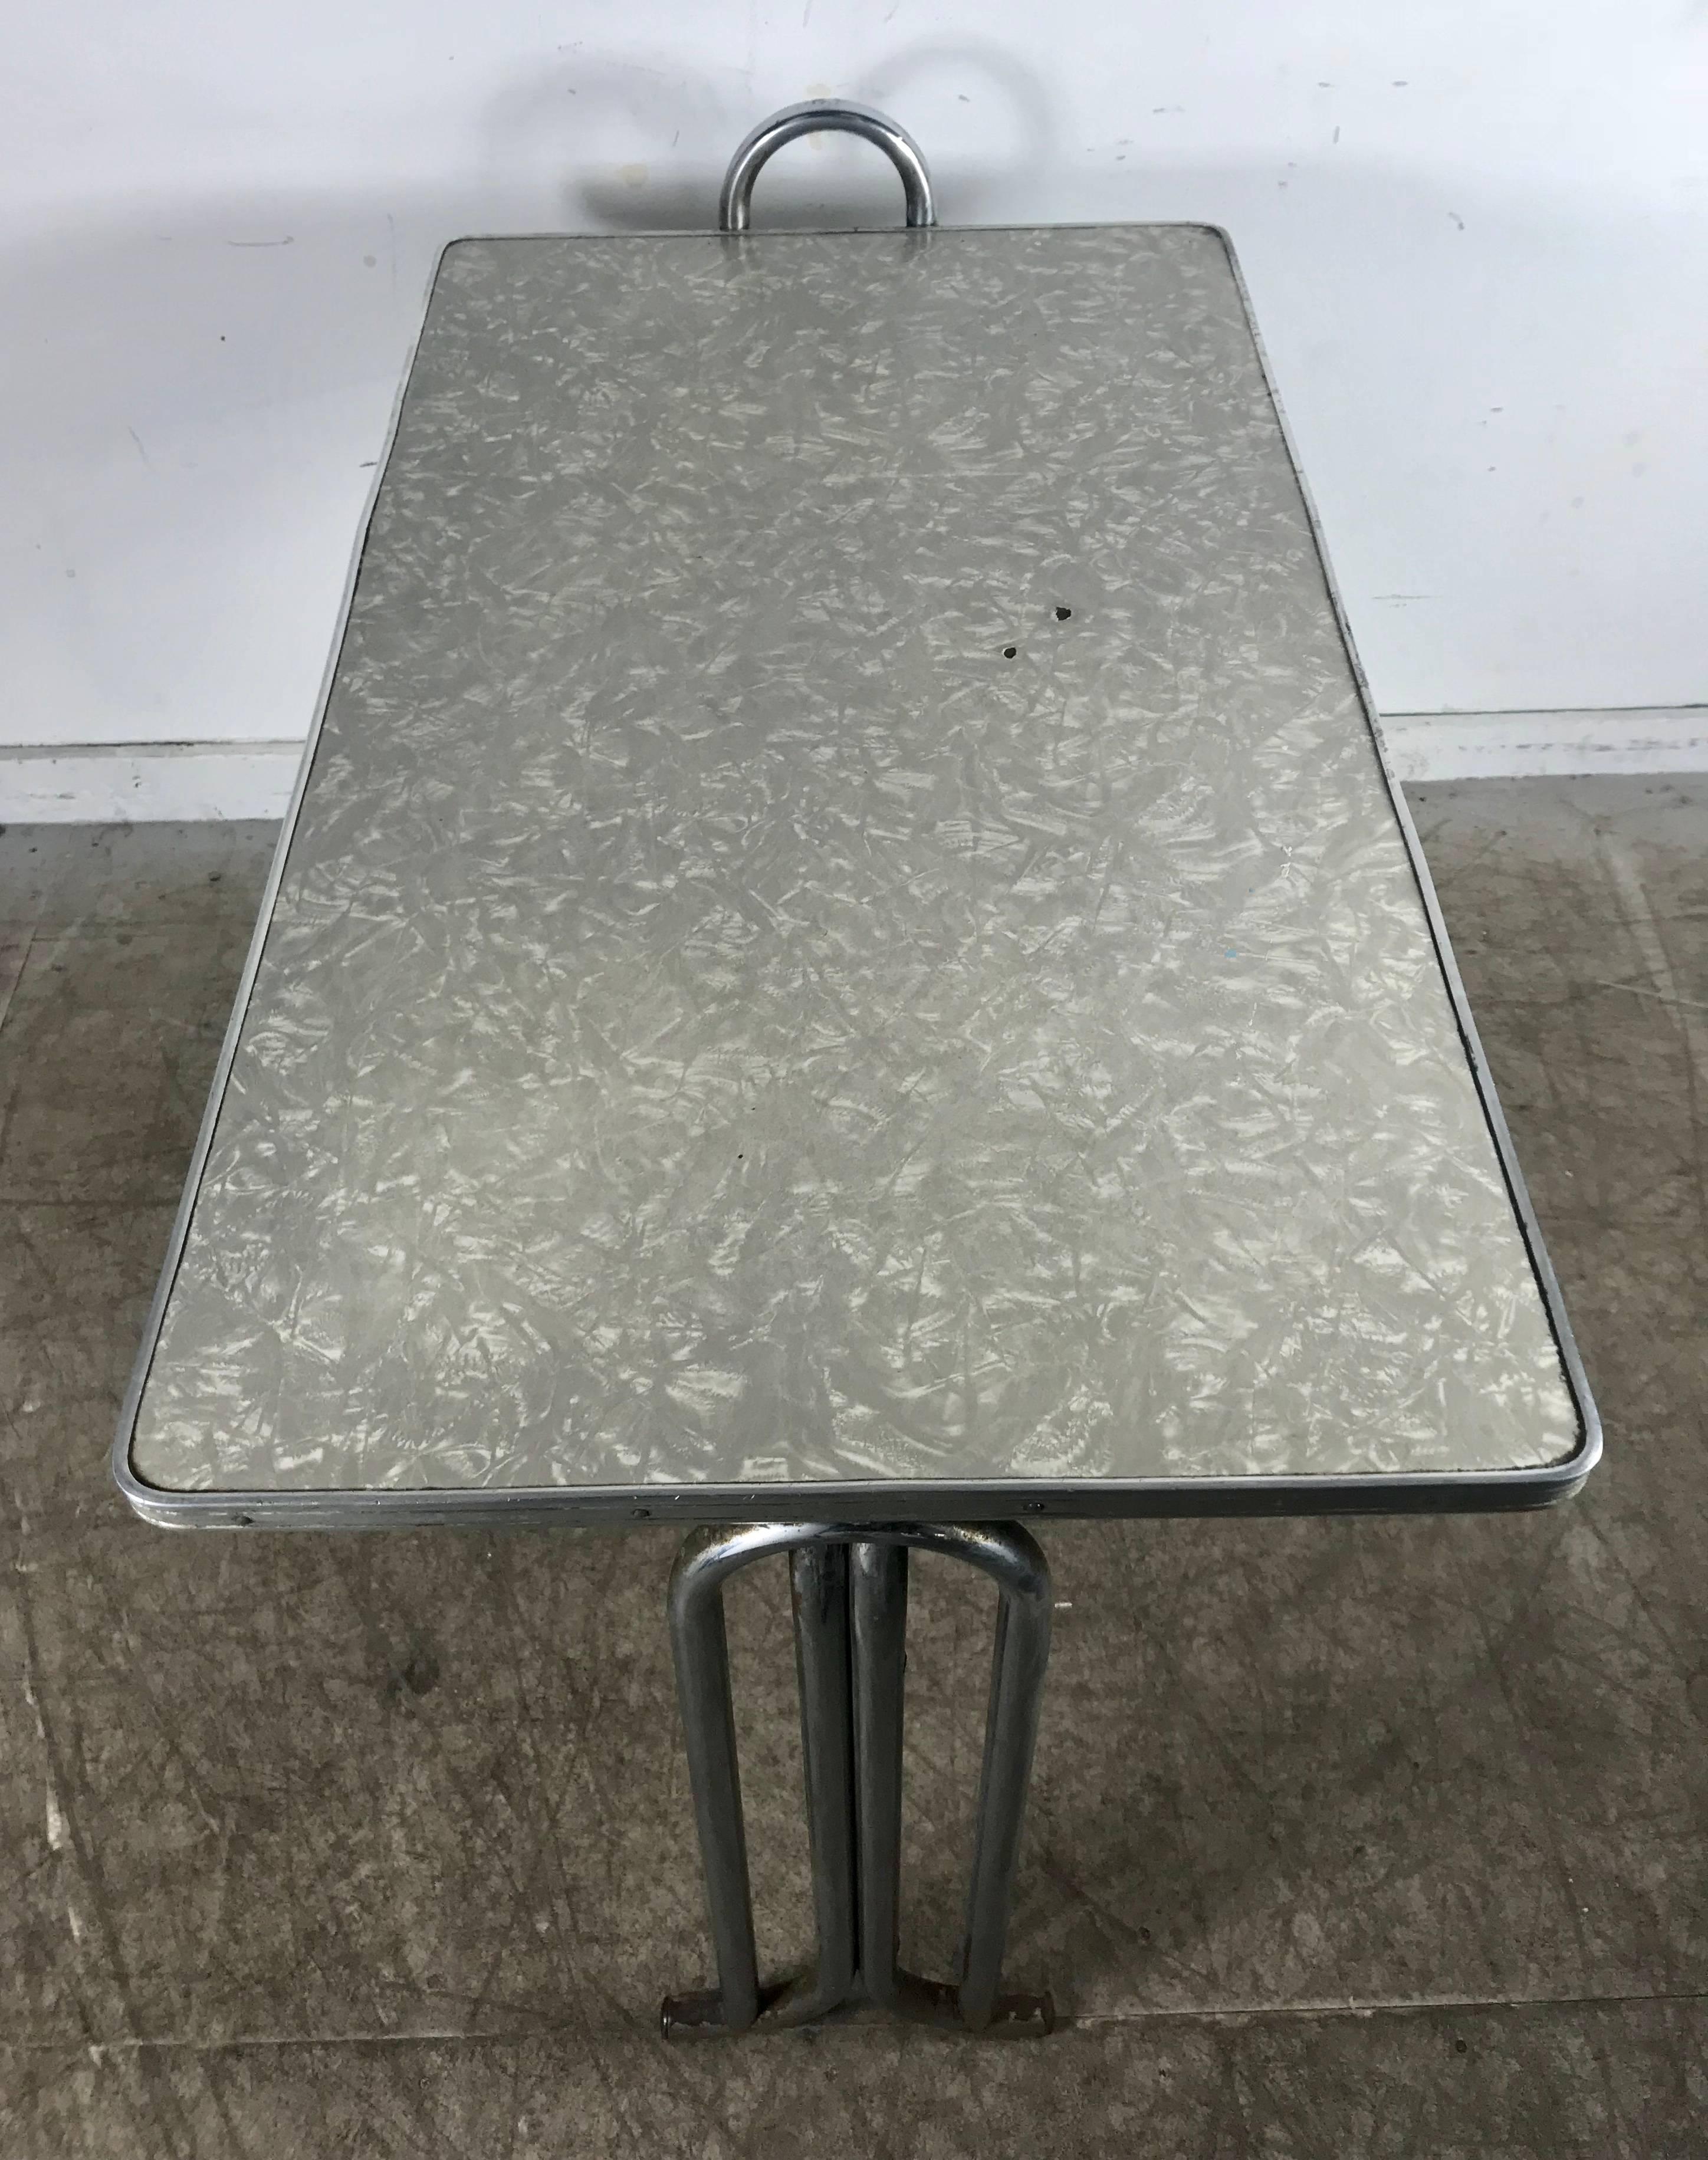 Aluminum Rare Art Deco, Machine Age Table or Desk designed by Wolfgang Hoffmann